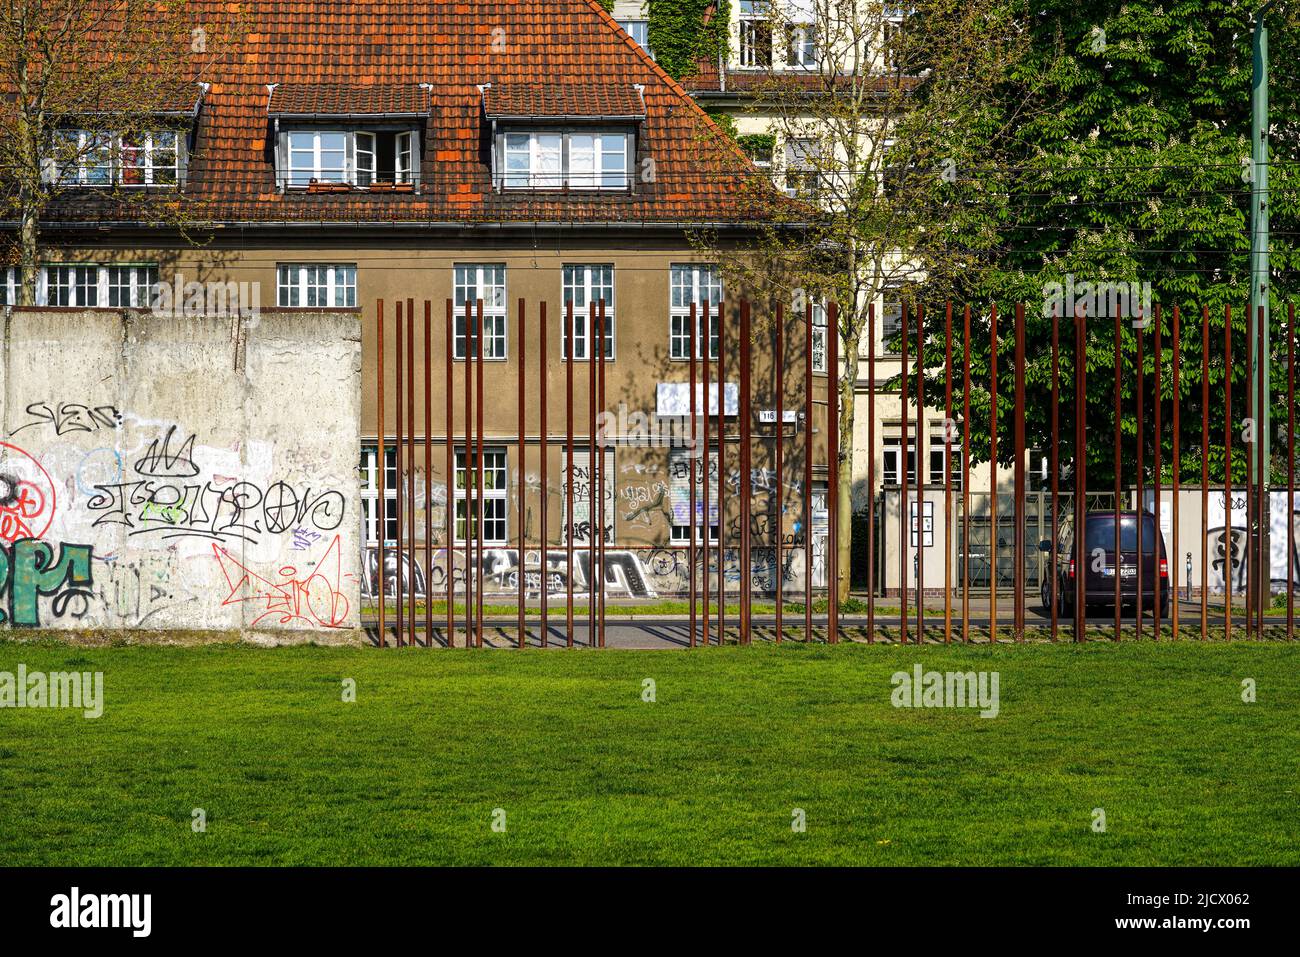 The Berlin Wall Memorial on Bernauer Strasse with a 60 meter long section of the former border, Berlin, Germany, 2.5.22 Stock Photo